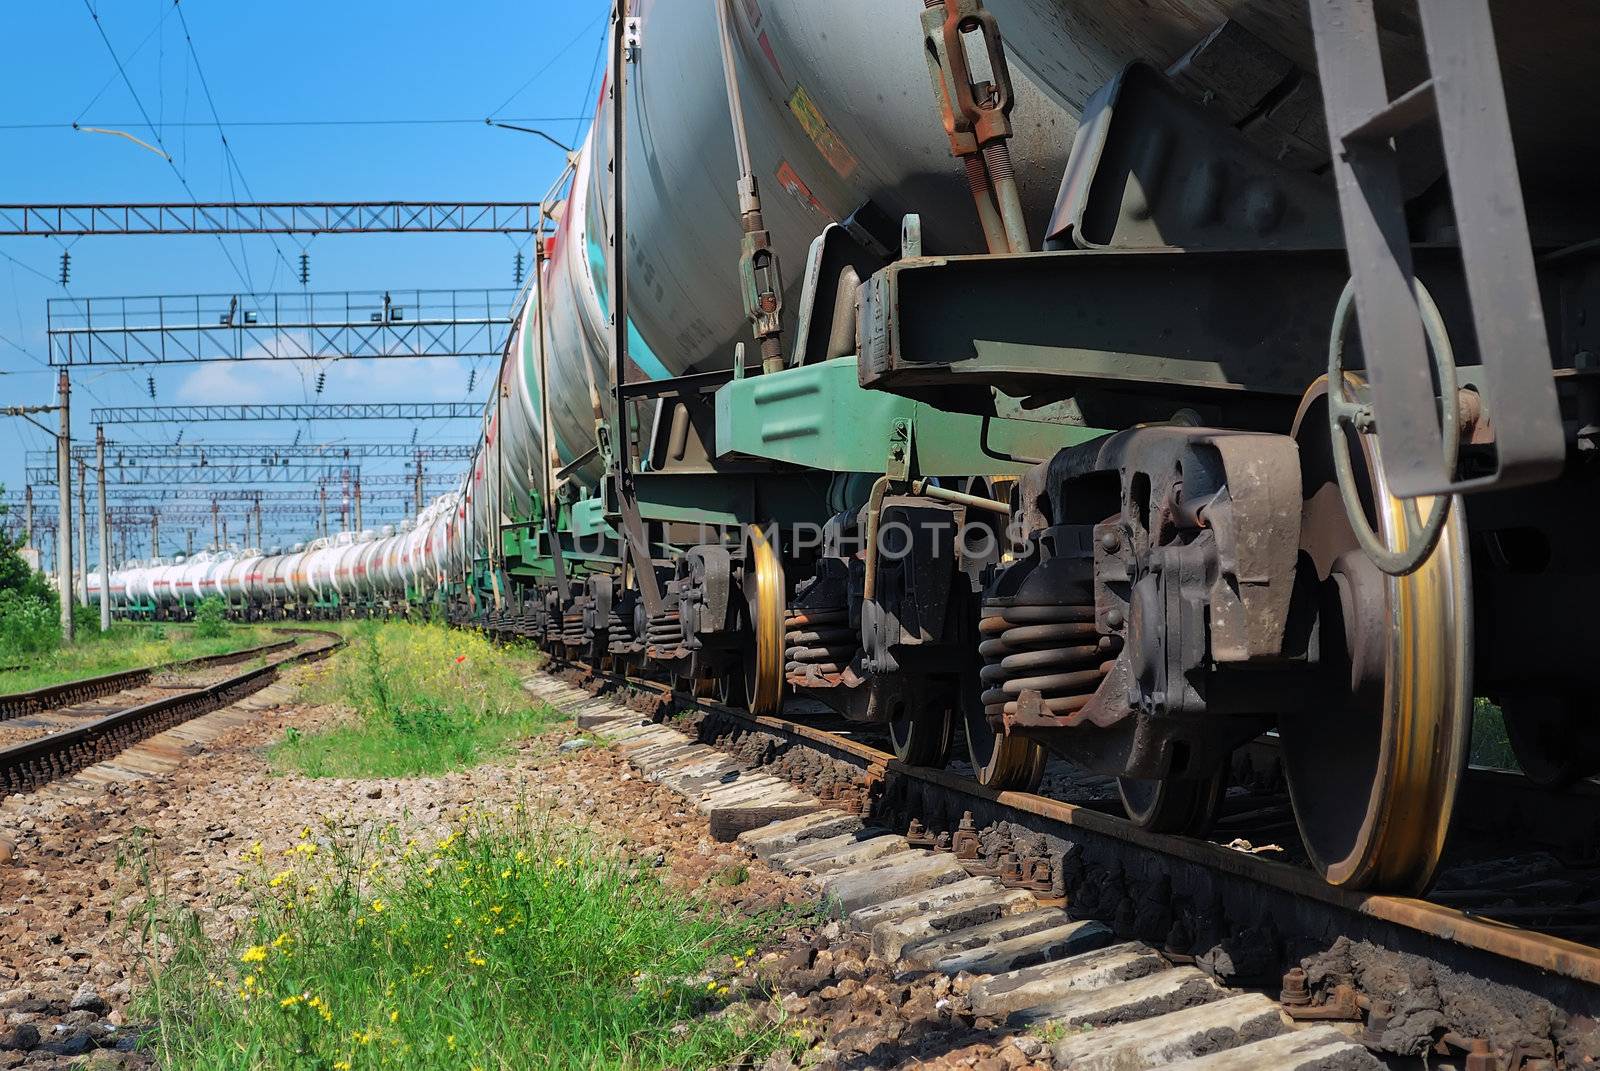 the train transports tanks with oil and fuel